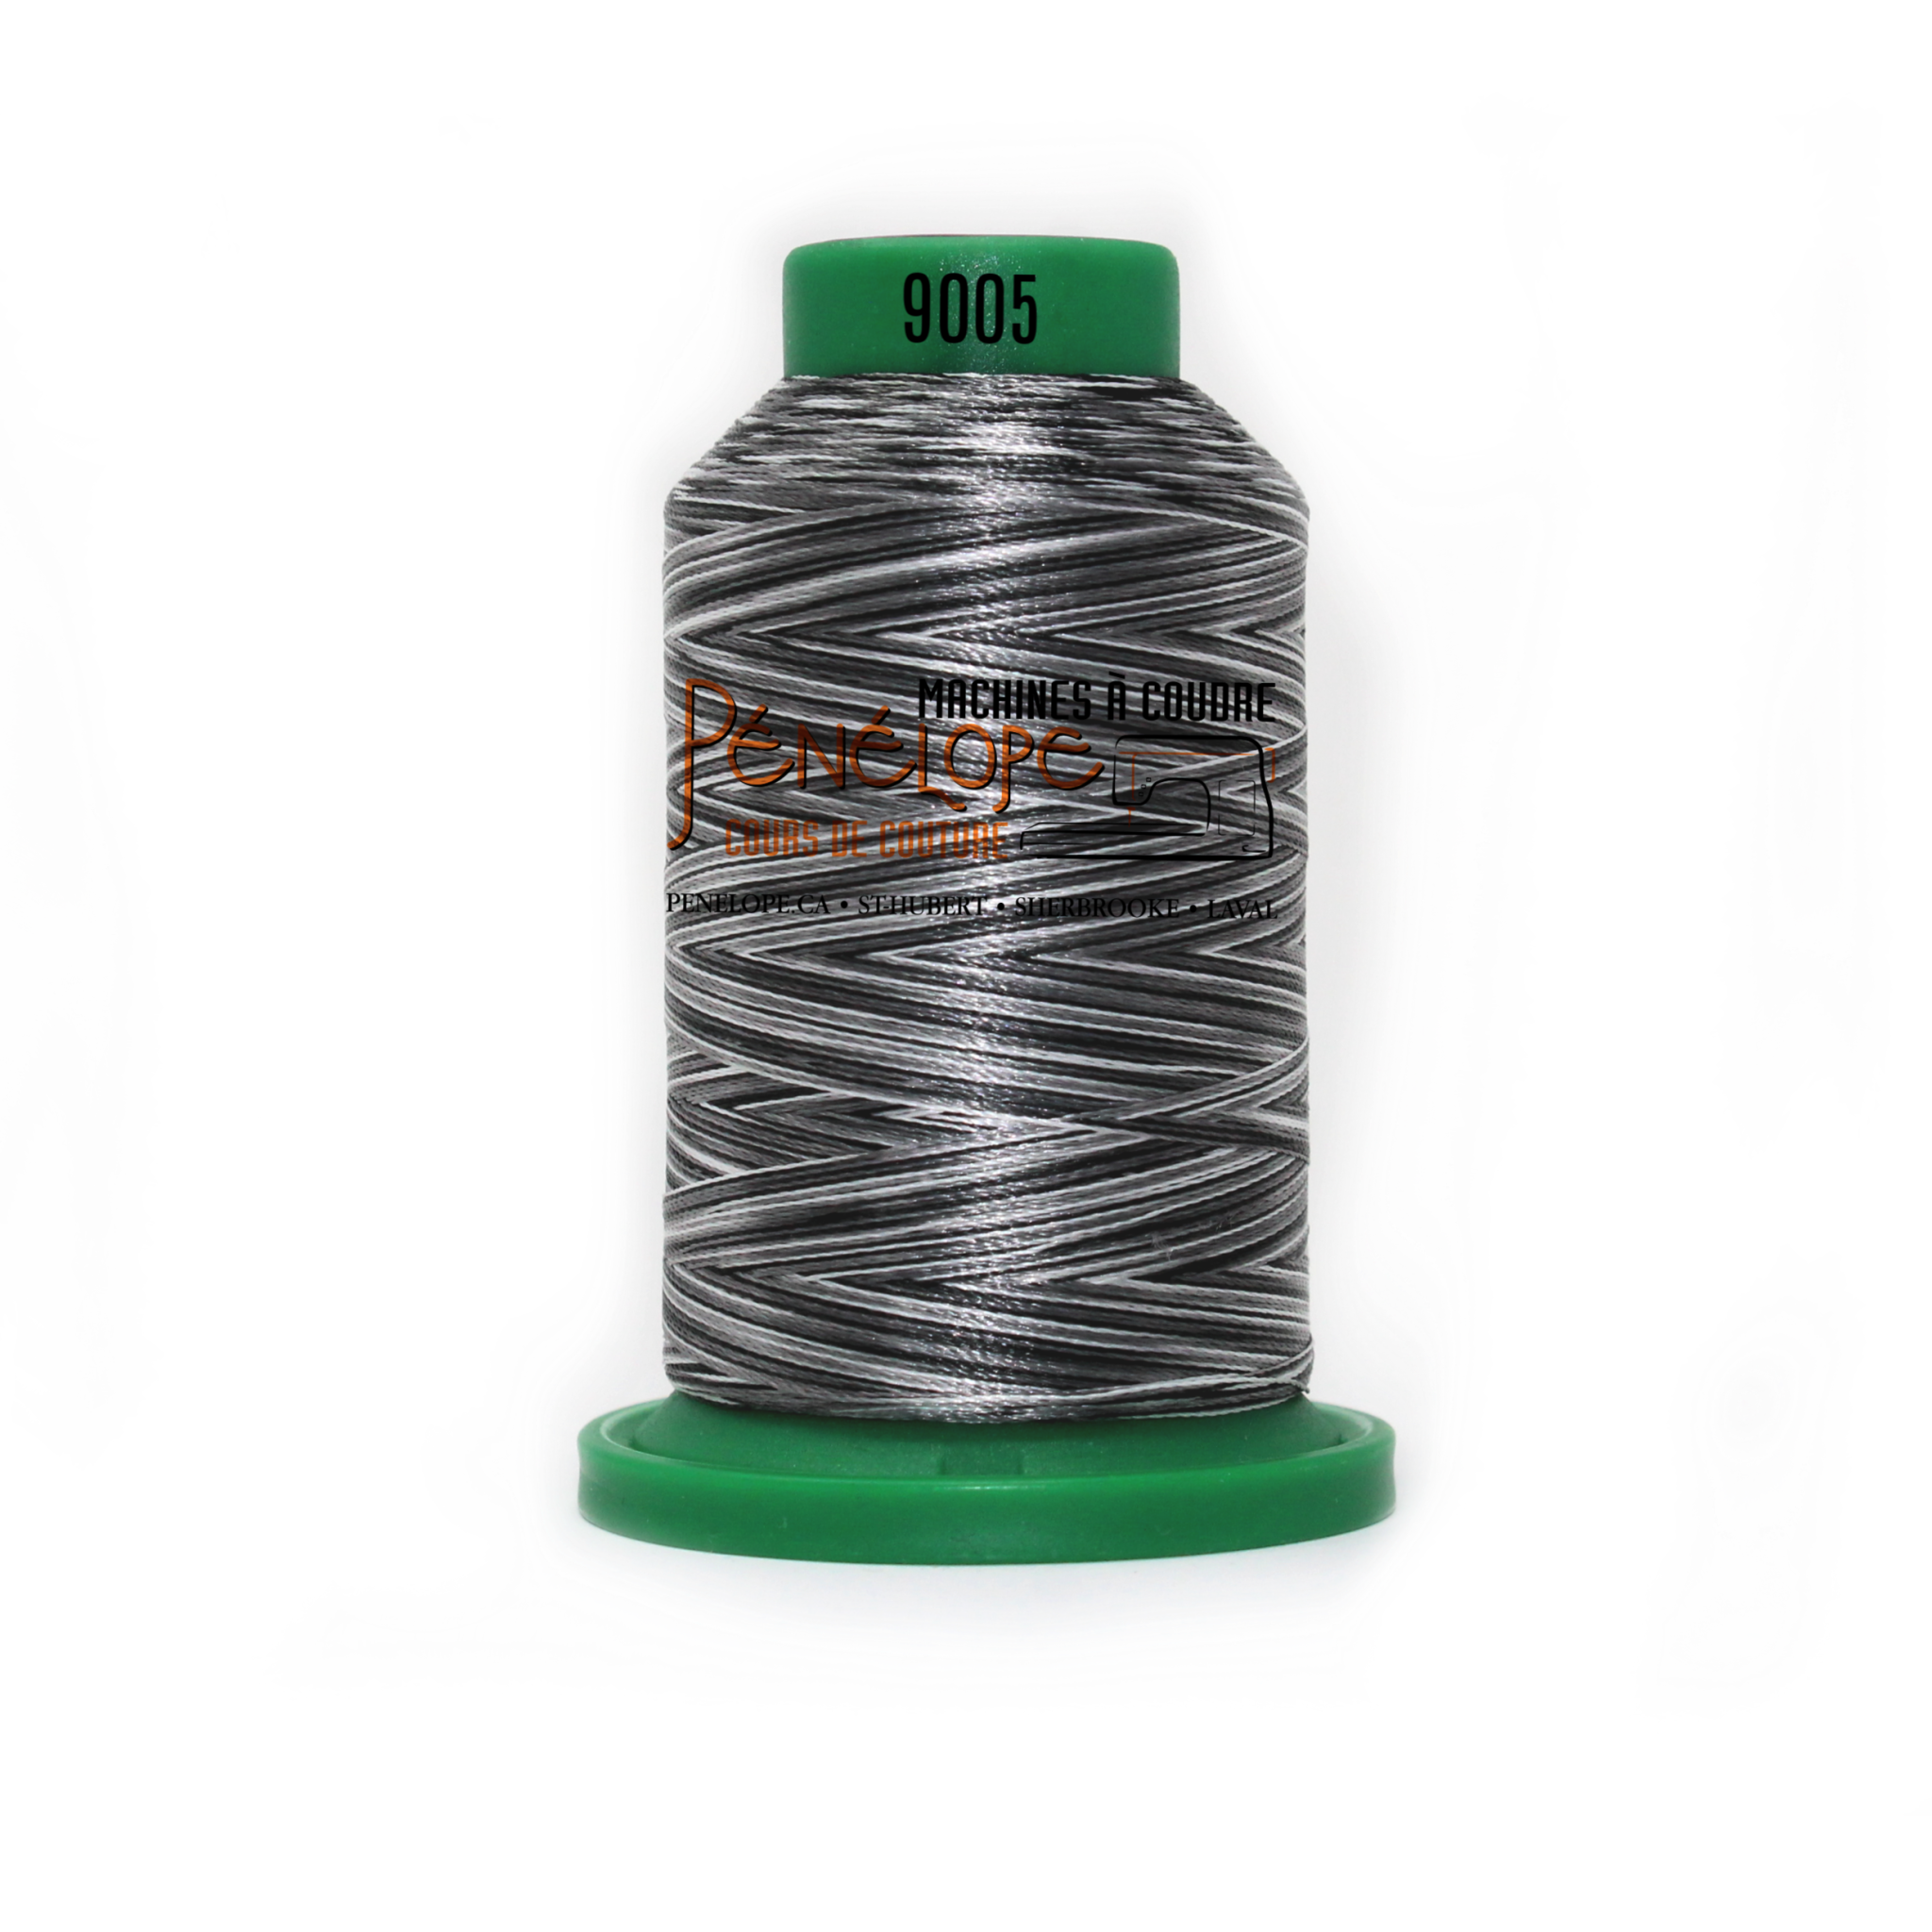 Isacord Isacord multicoloured sewing and embroidery thread 9005 1000m